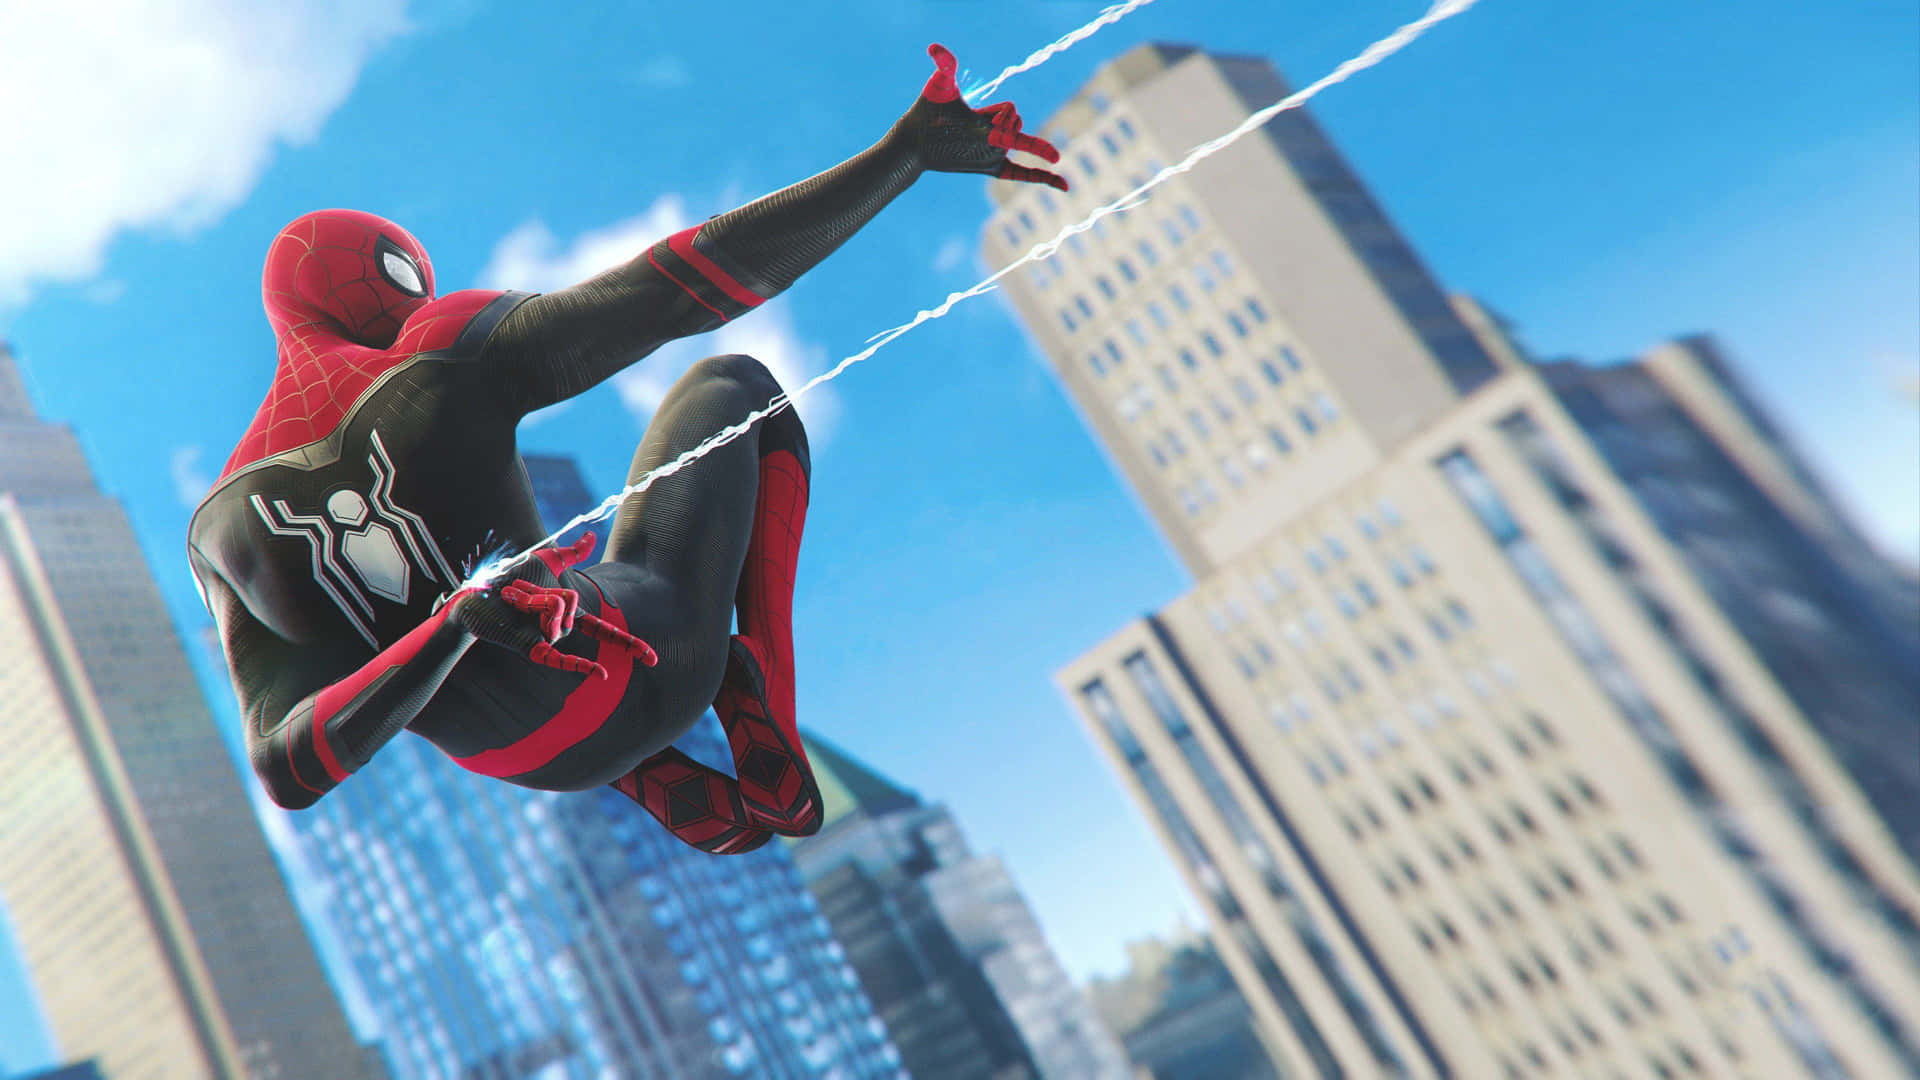 Exciting High-Resolution Image of Spider-Man on PS4 in 4K Wallpaper